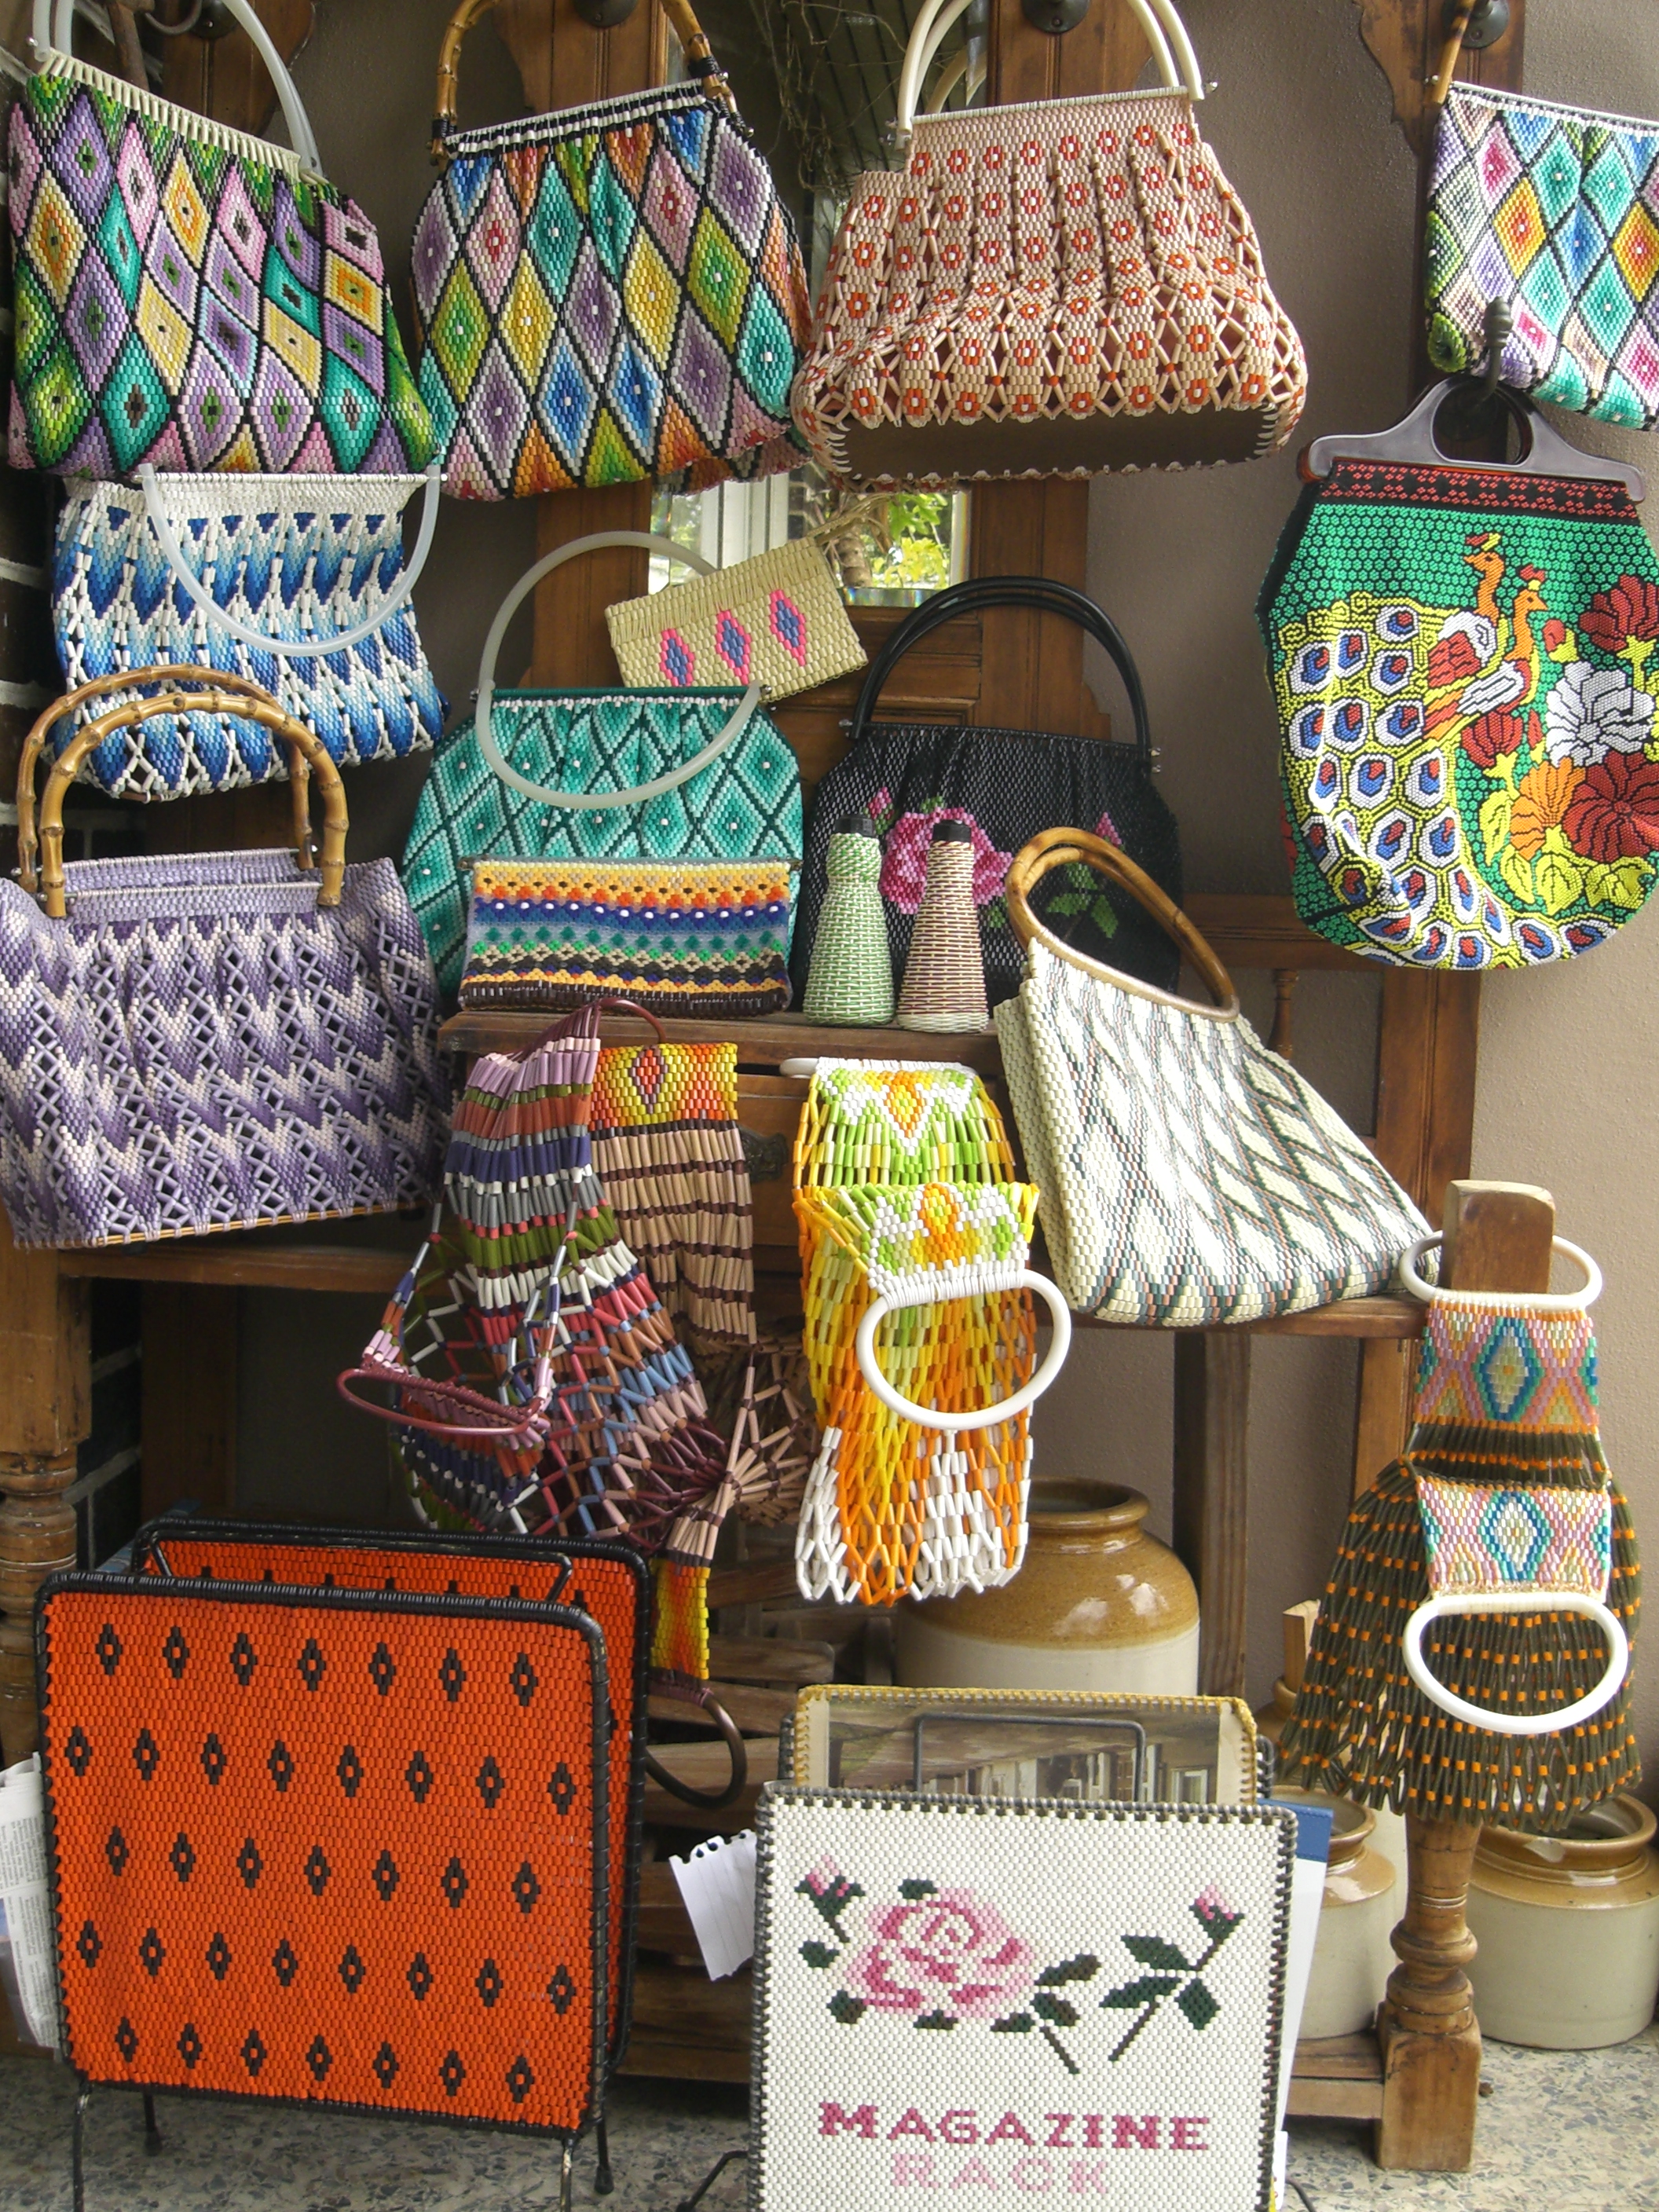 Handbags and other items made from plastic beads cut from flame polished plastic tubing  - as was done in the mid-1960s